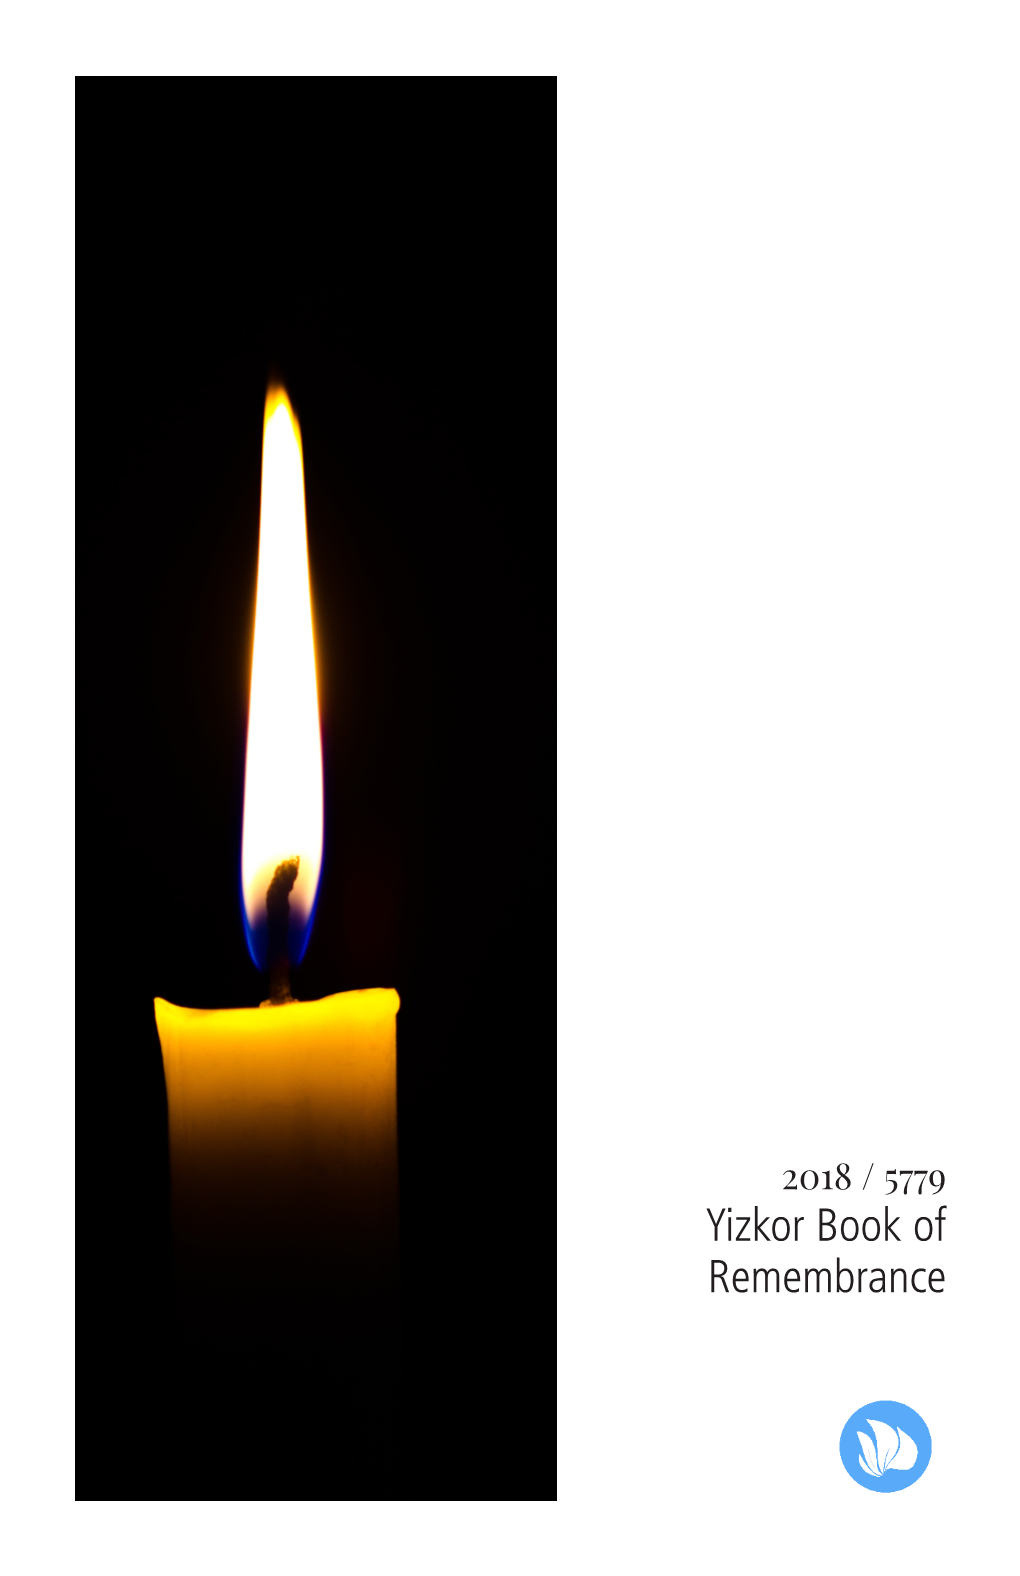 Yizkor Book of Remembrance